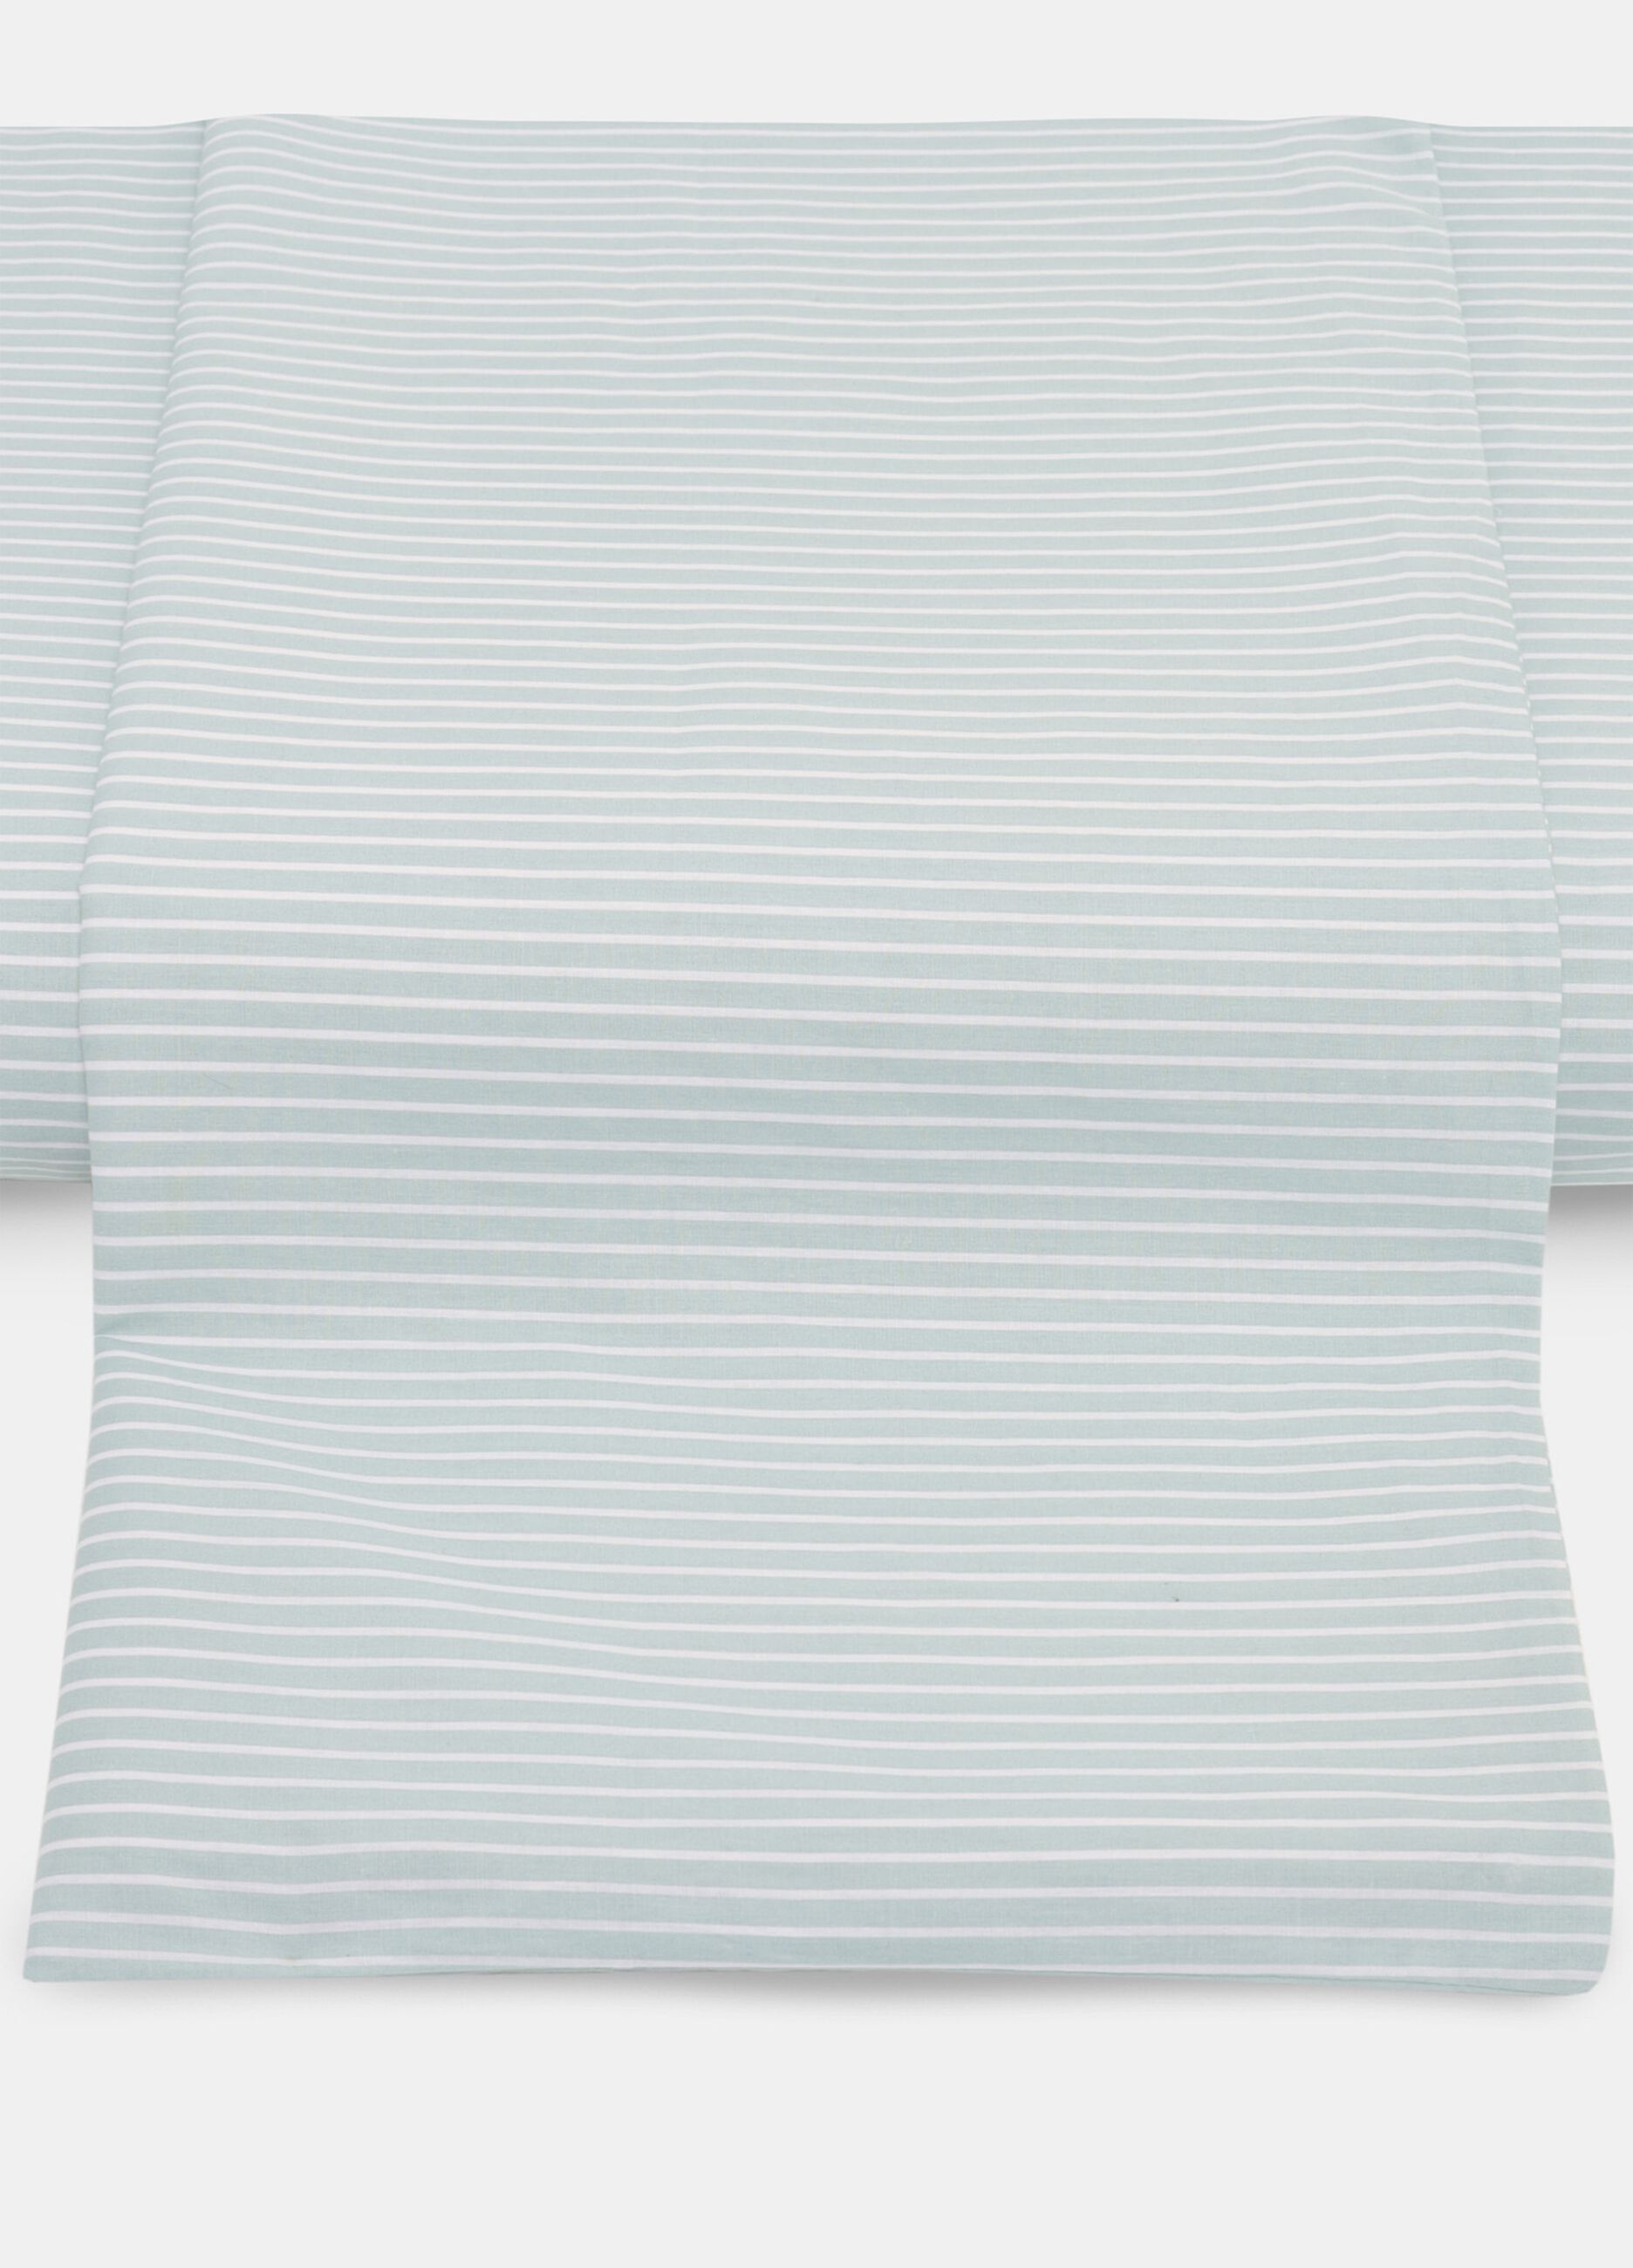 Striped double bed duvet cover in cotton